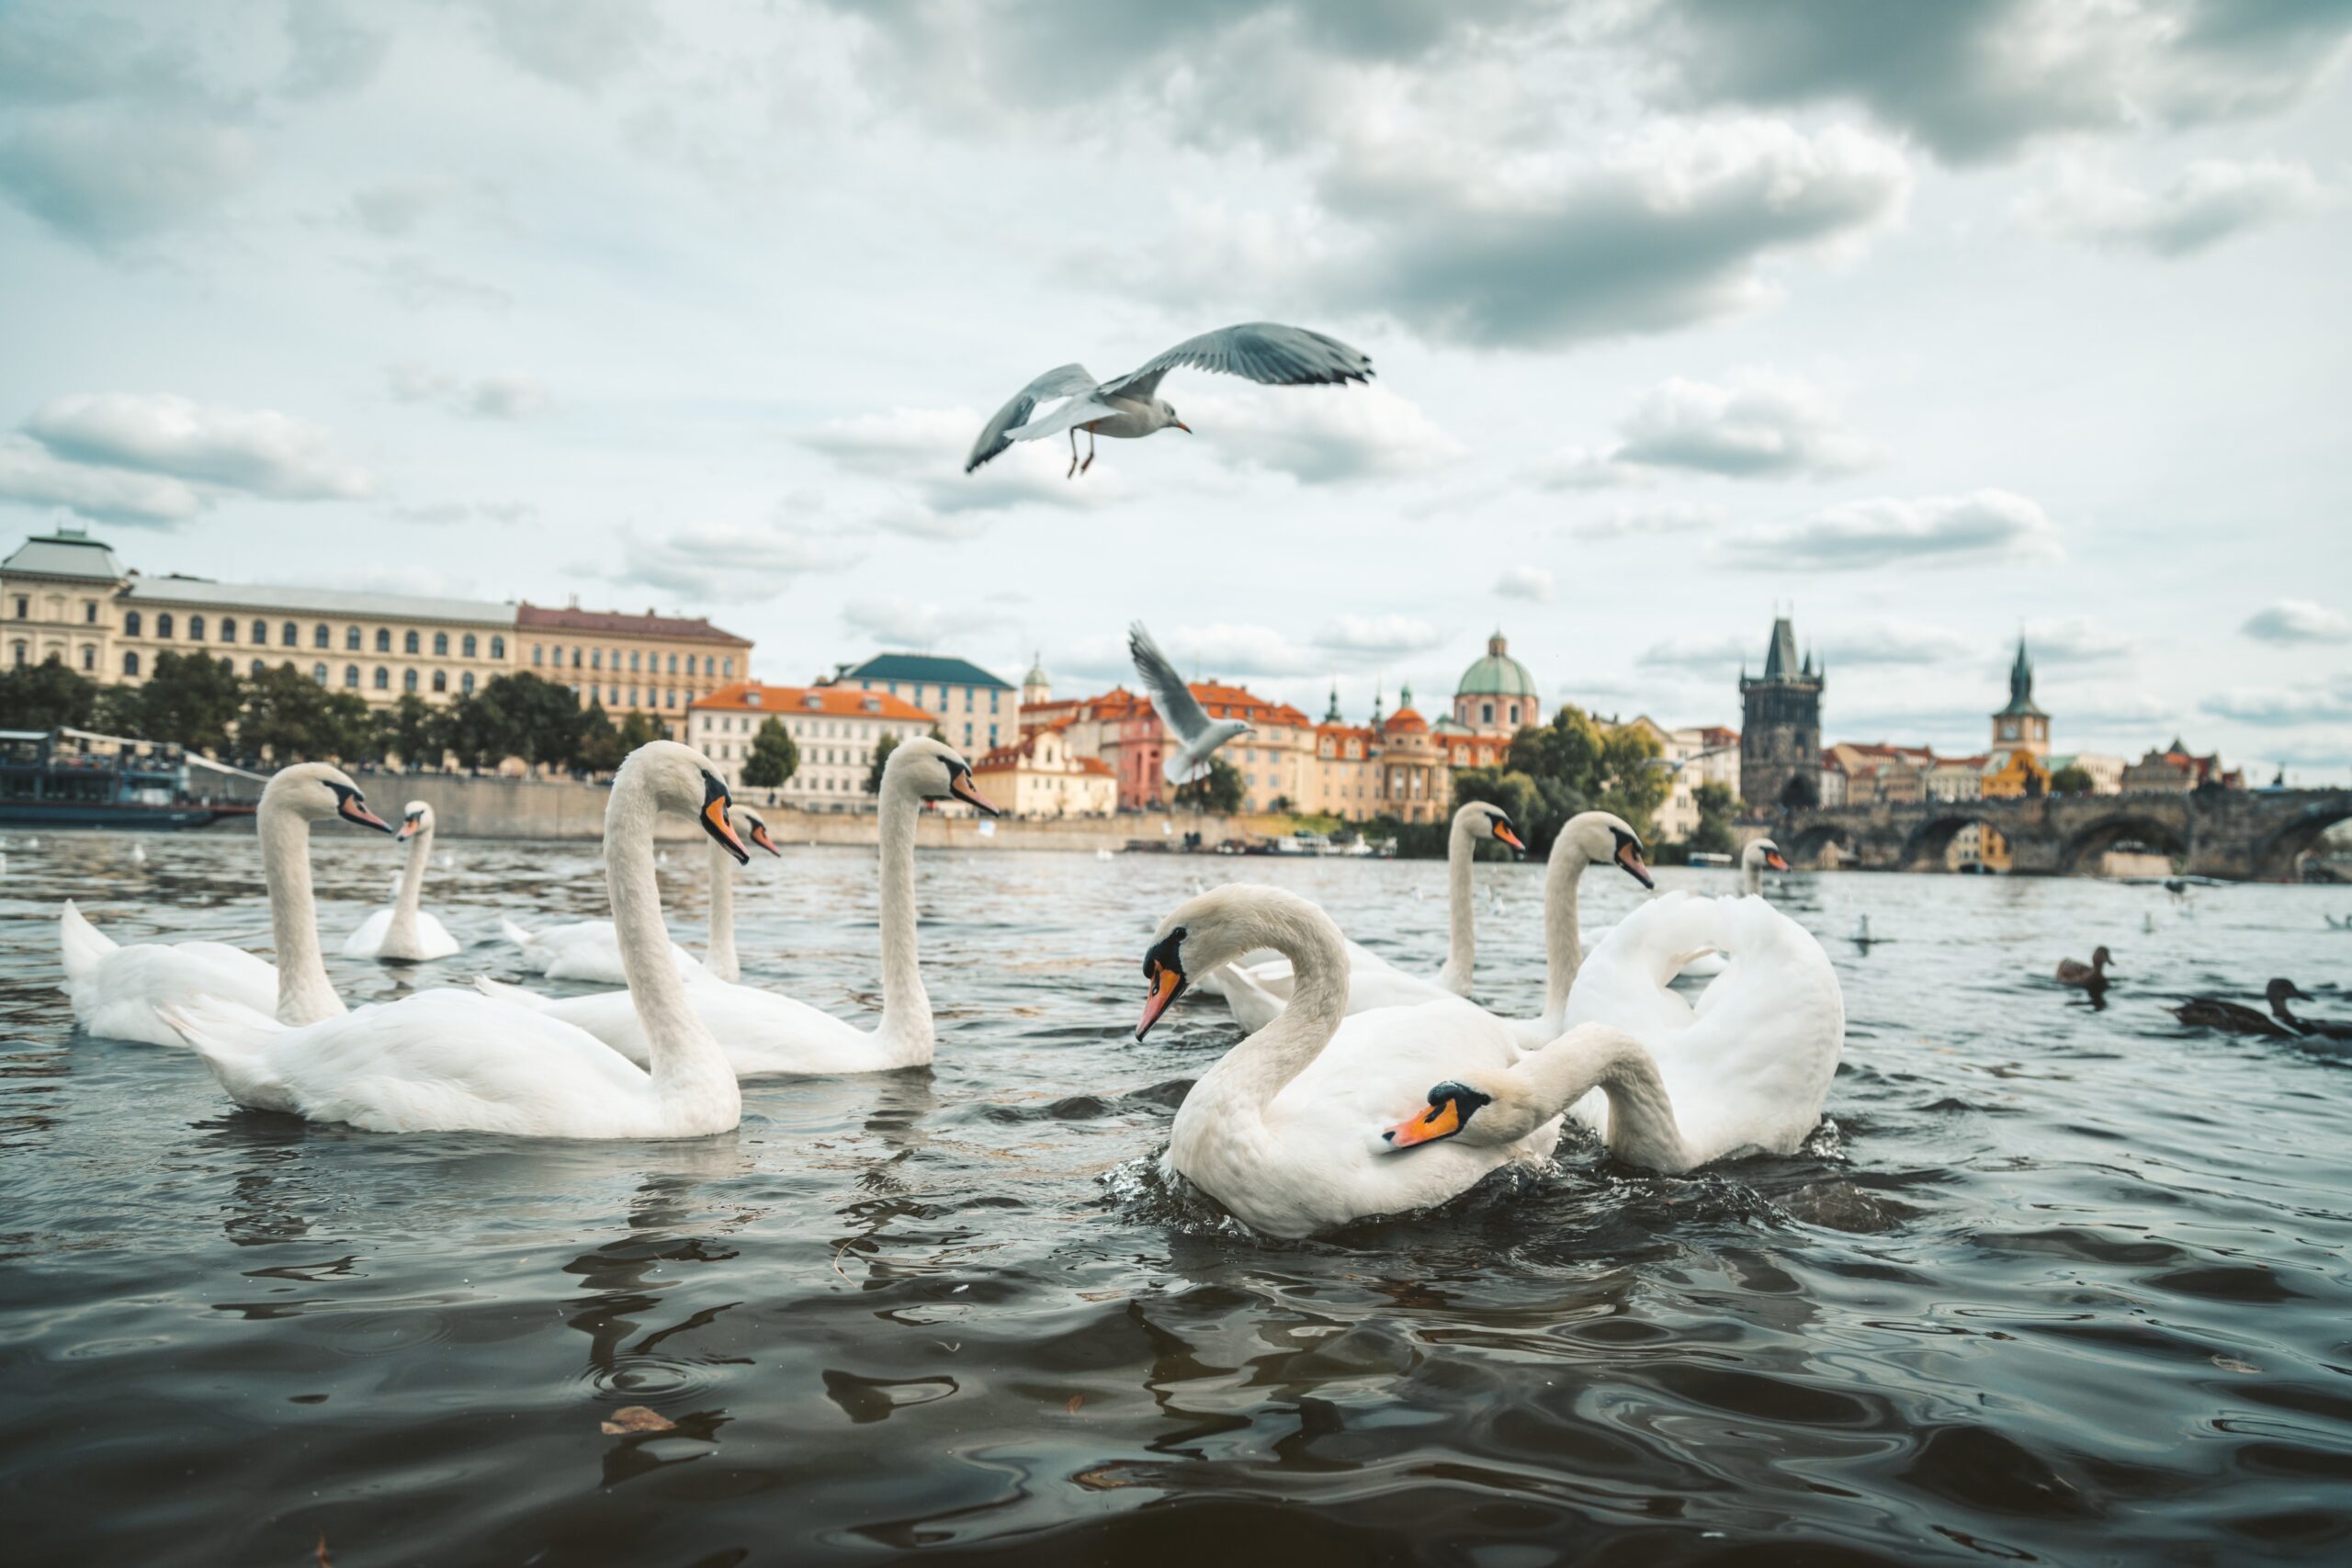 Beautiful shot of white swans and seagulls in the lake in Prague, Czech Republic